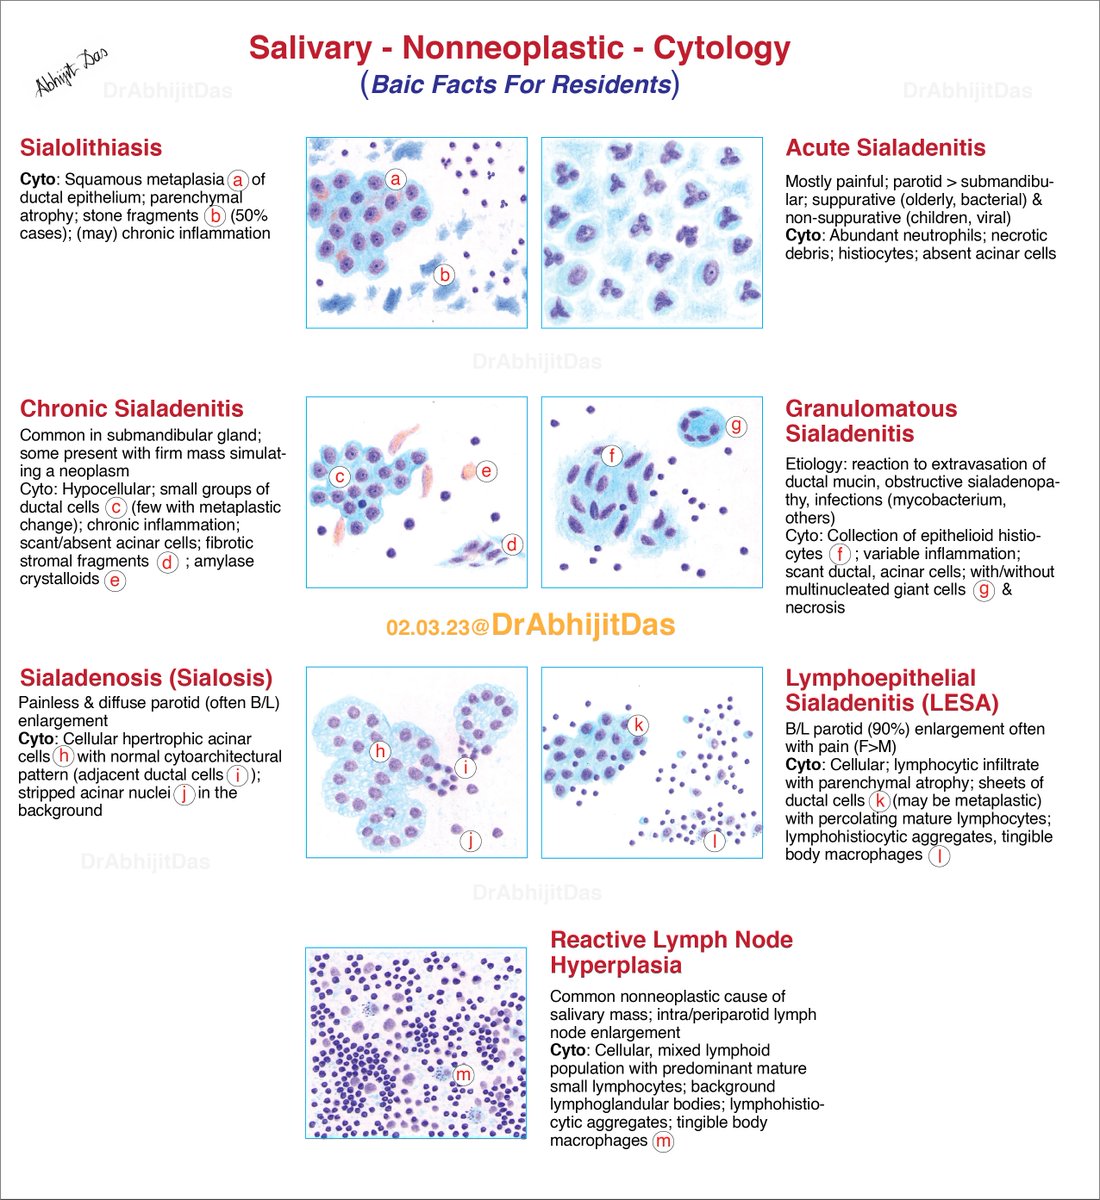 SALIVARY NONNEOPLASTIC LESIONS: Basic Cytology for Residents Sialolithiasis Sialadenitis Sialadenosis LESA #MakeCytoPathEasy #SalivaryNonneoplastic #BFFR